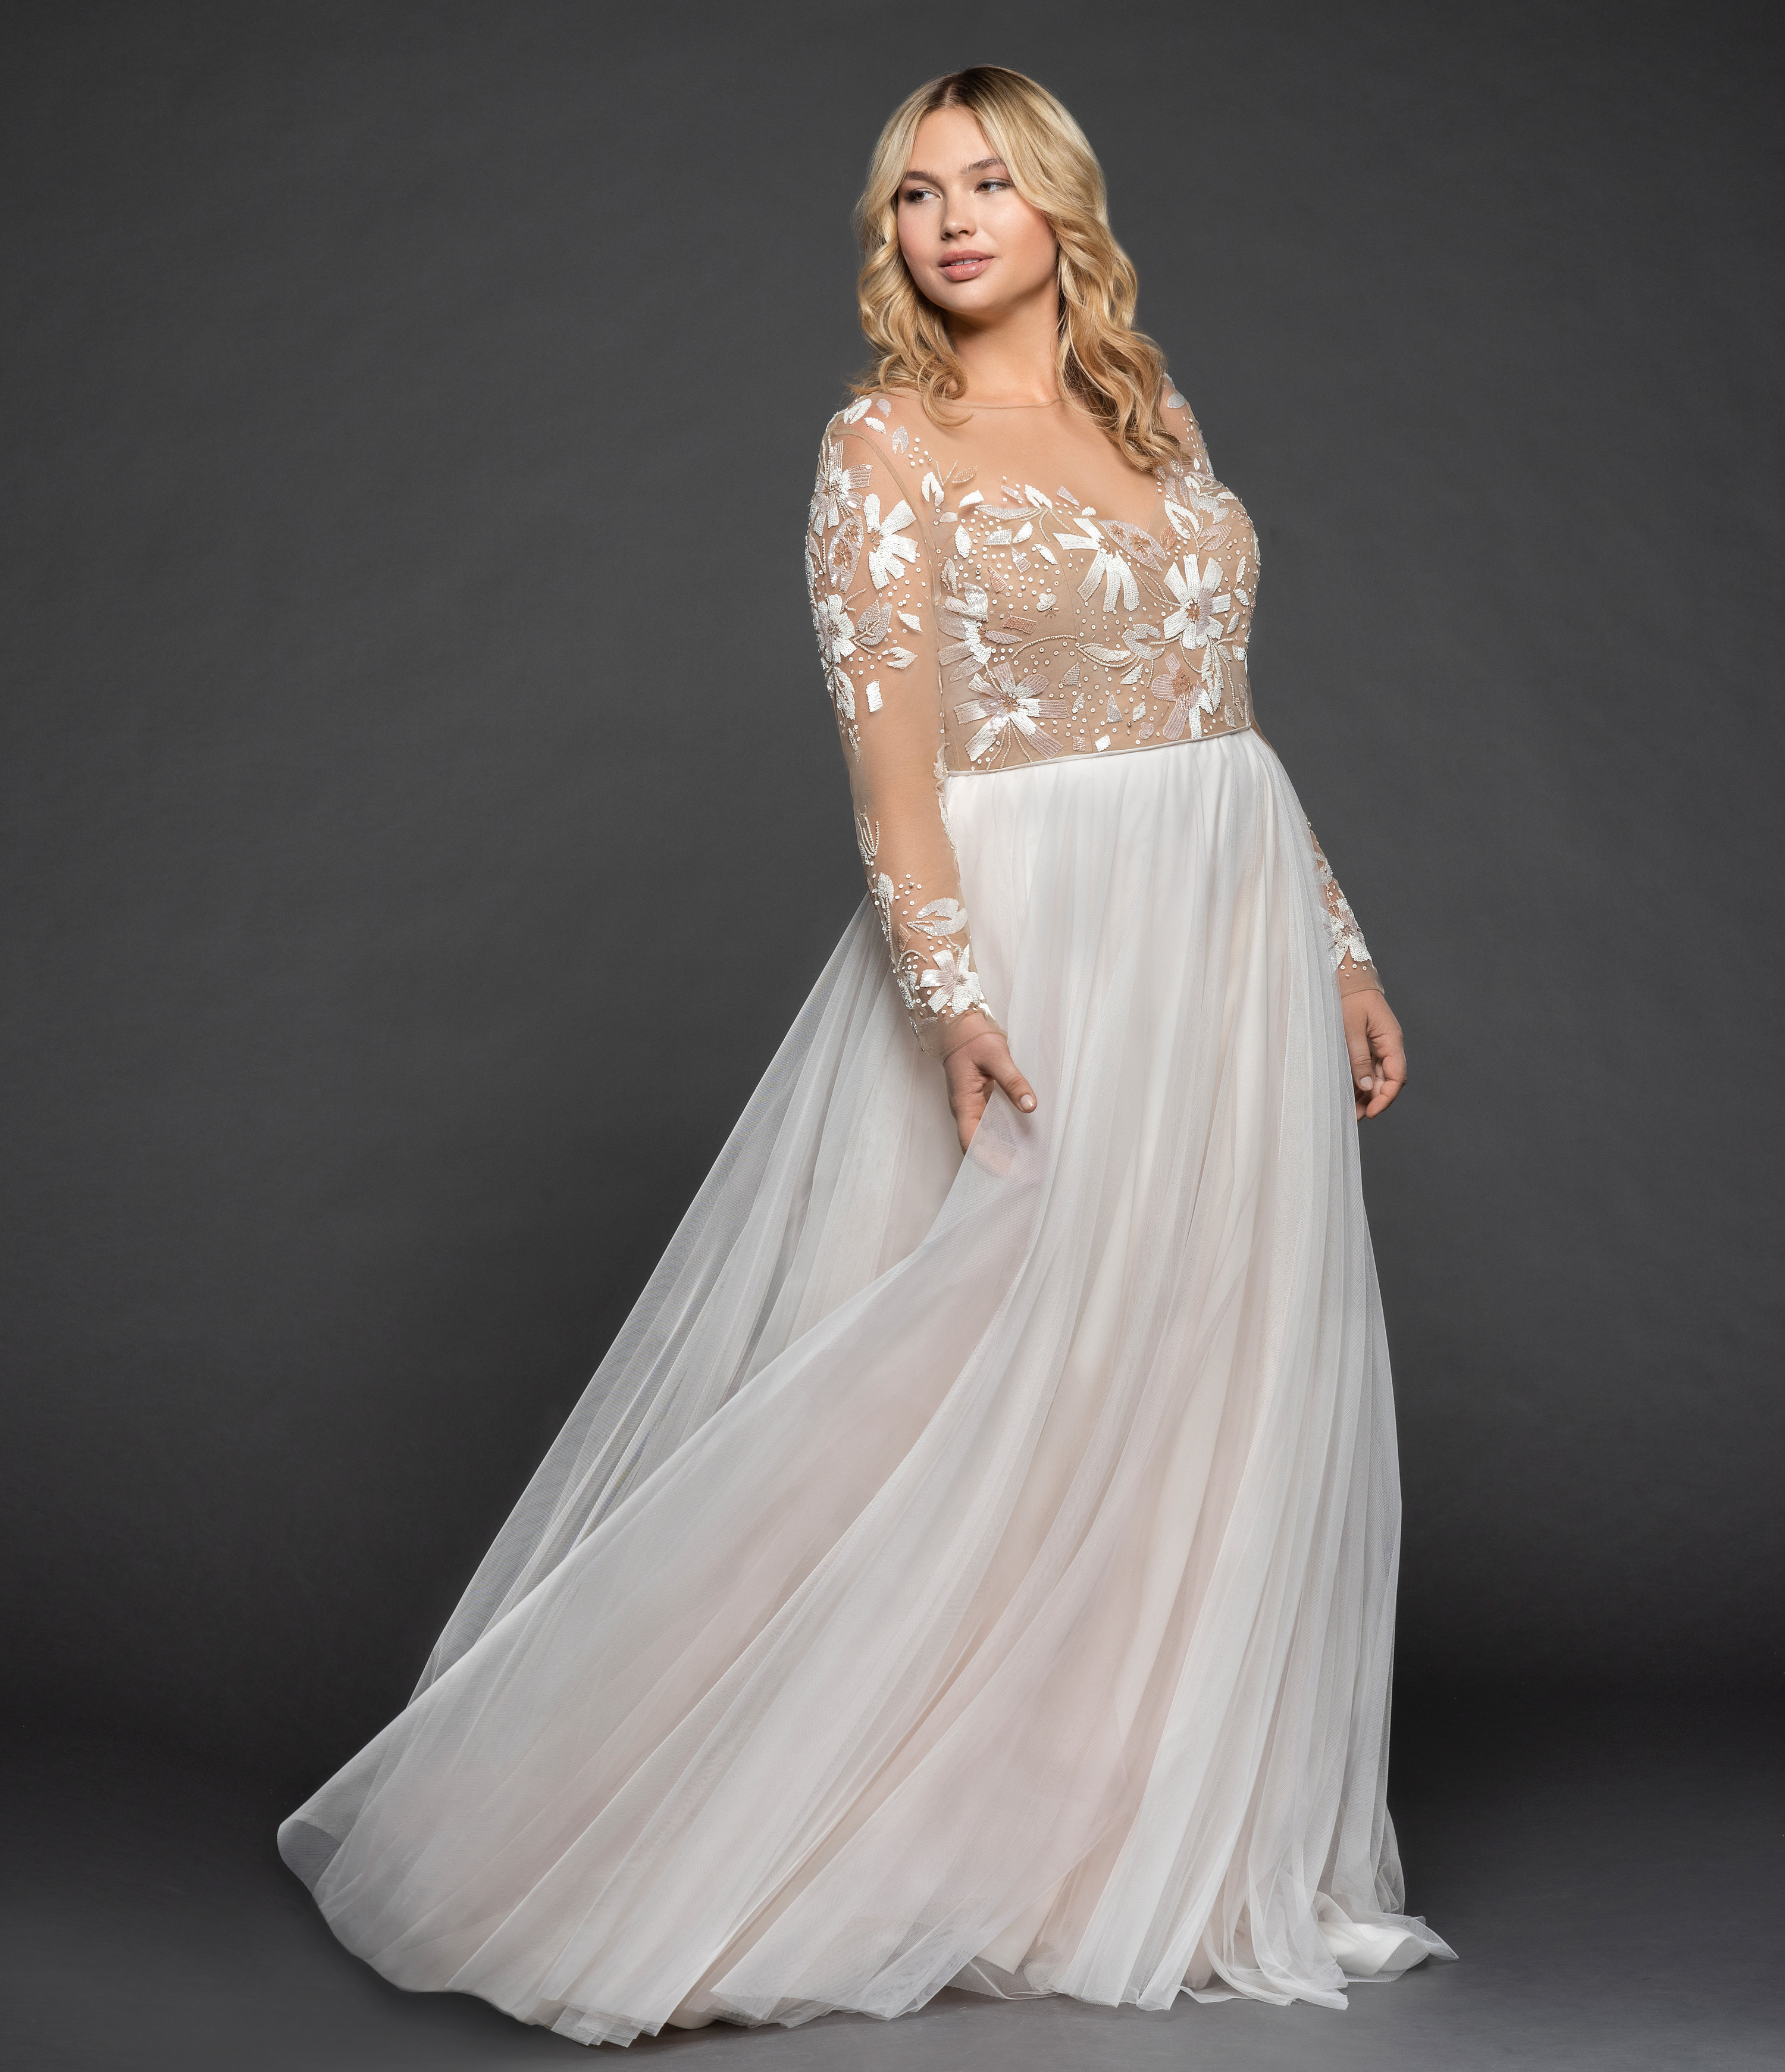 Bridal Gowns And Wedding Dresses By Jlm Couture Style 6904s Nash